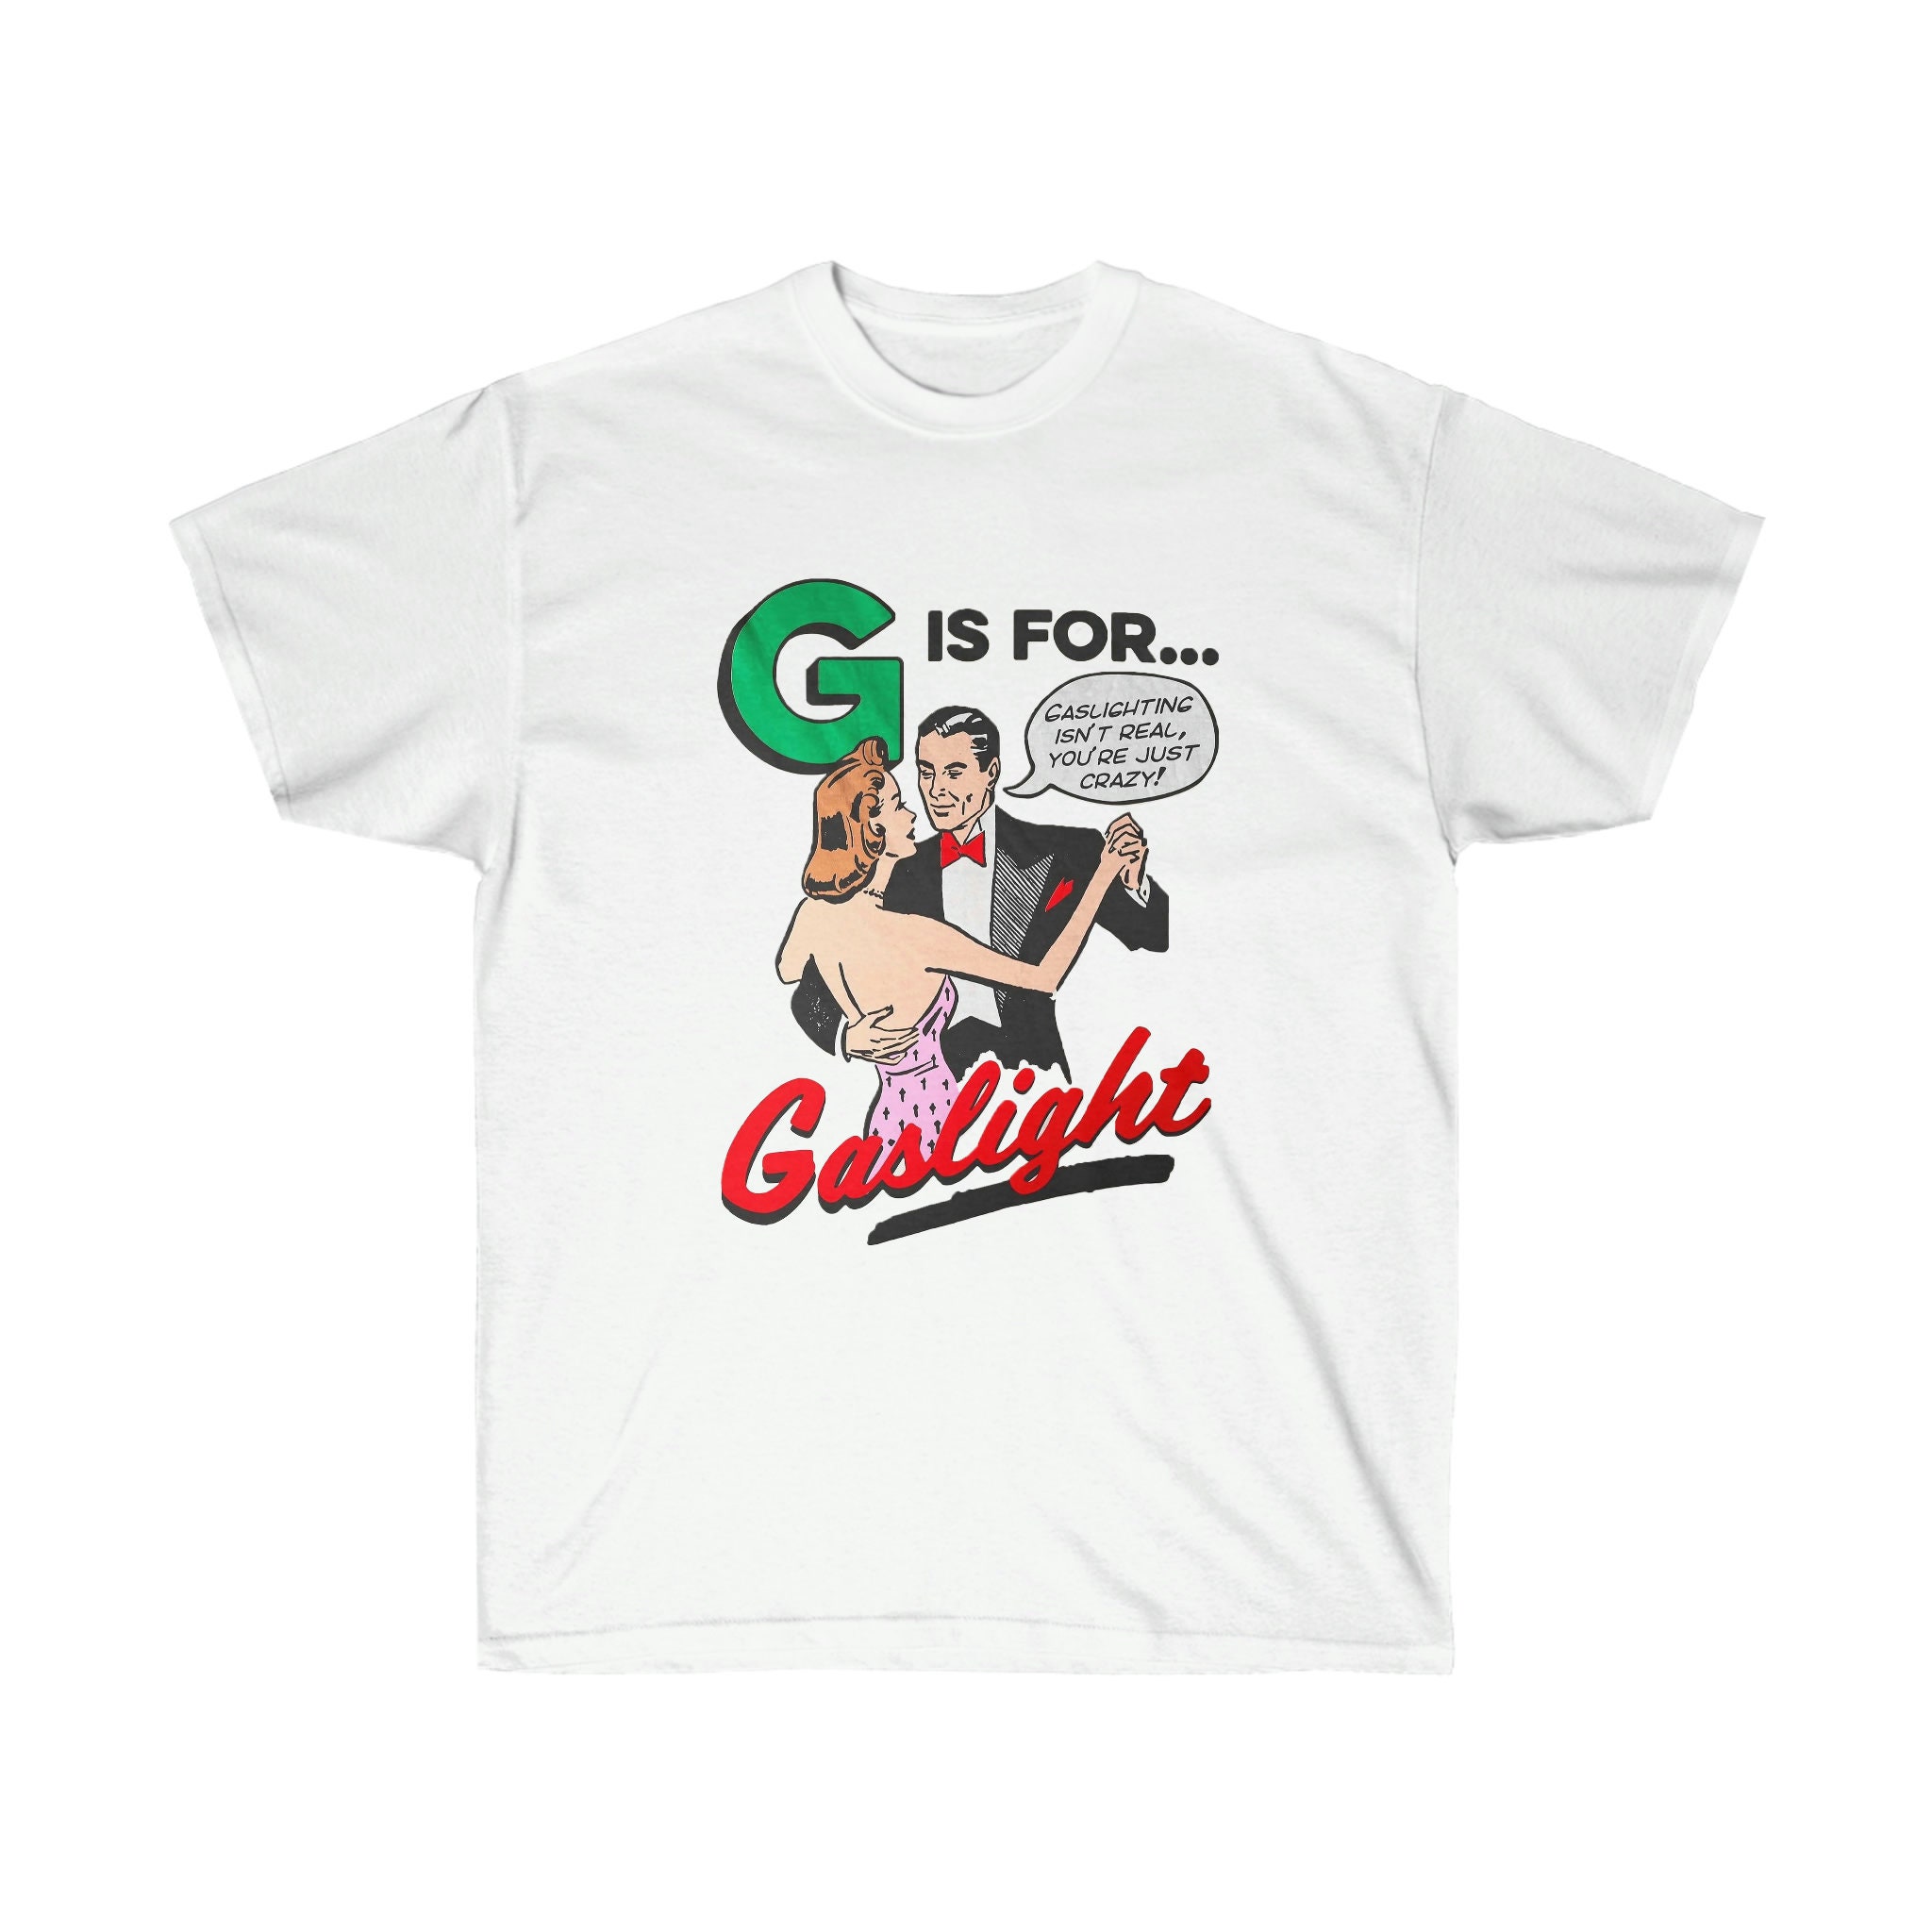 G is for Gaslight White Cotton Classic Fit T-shirt With